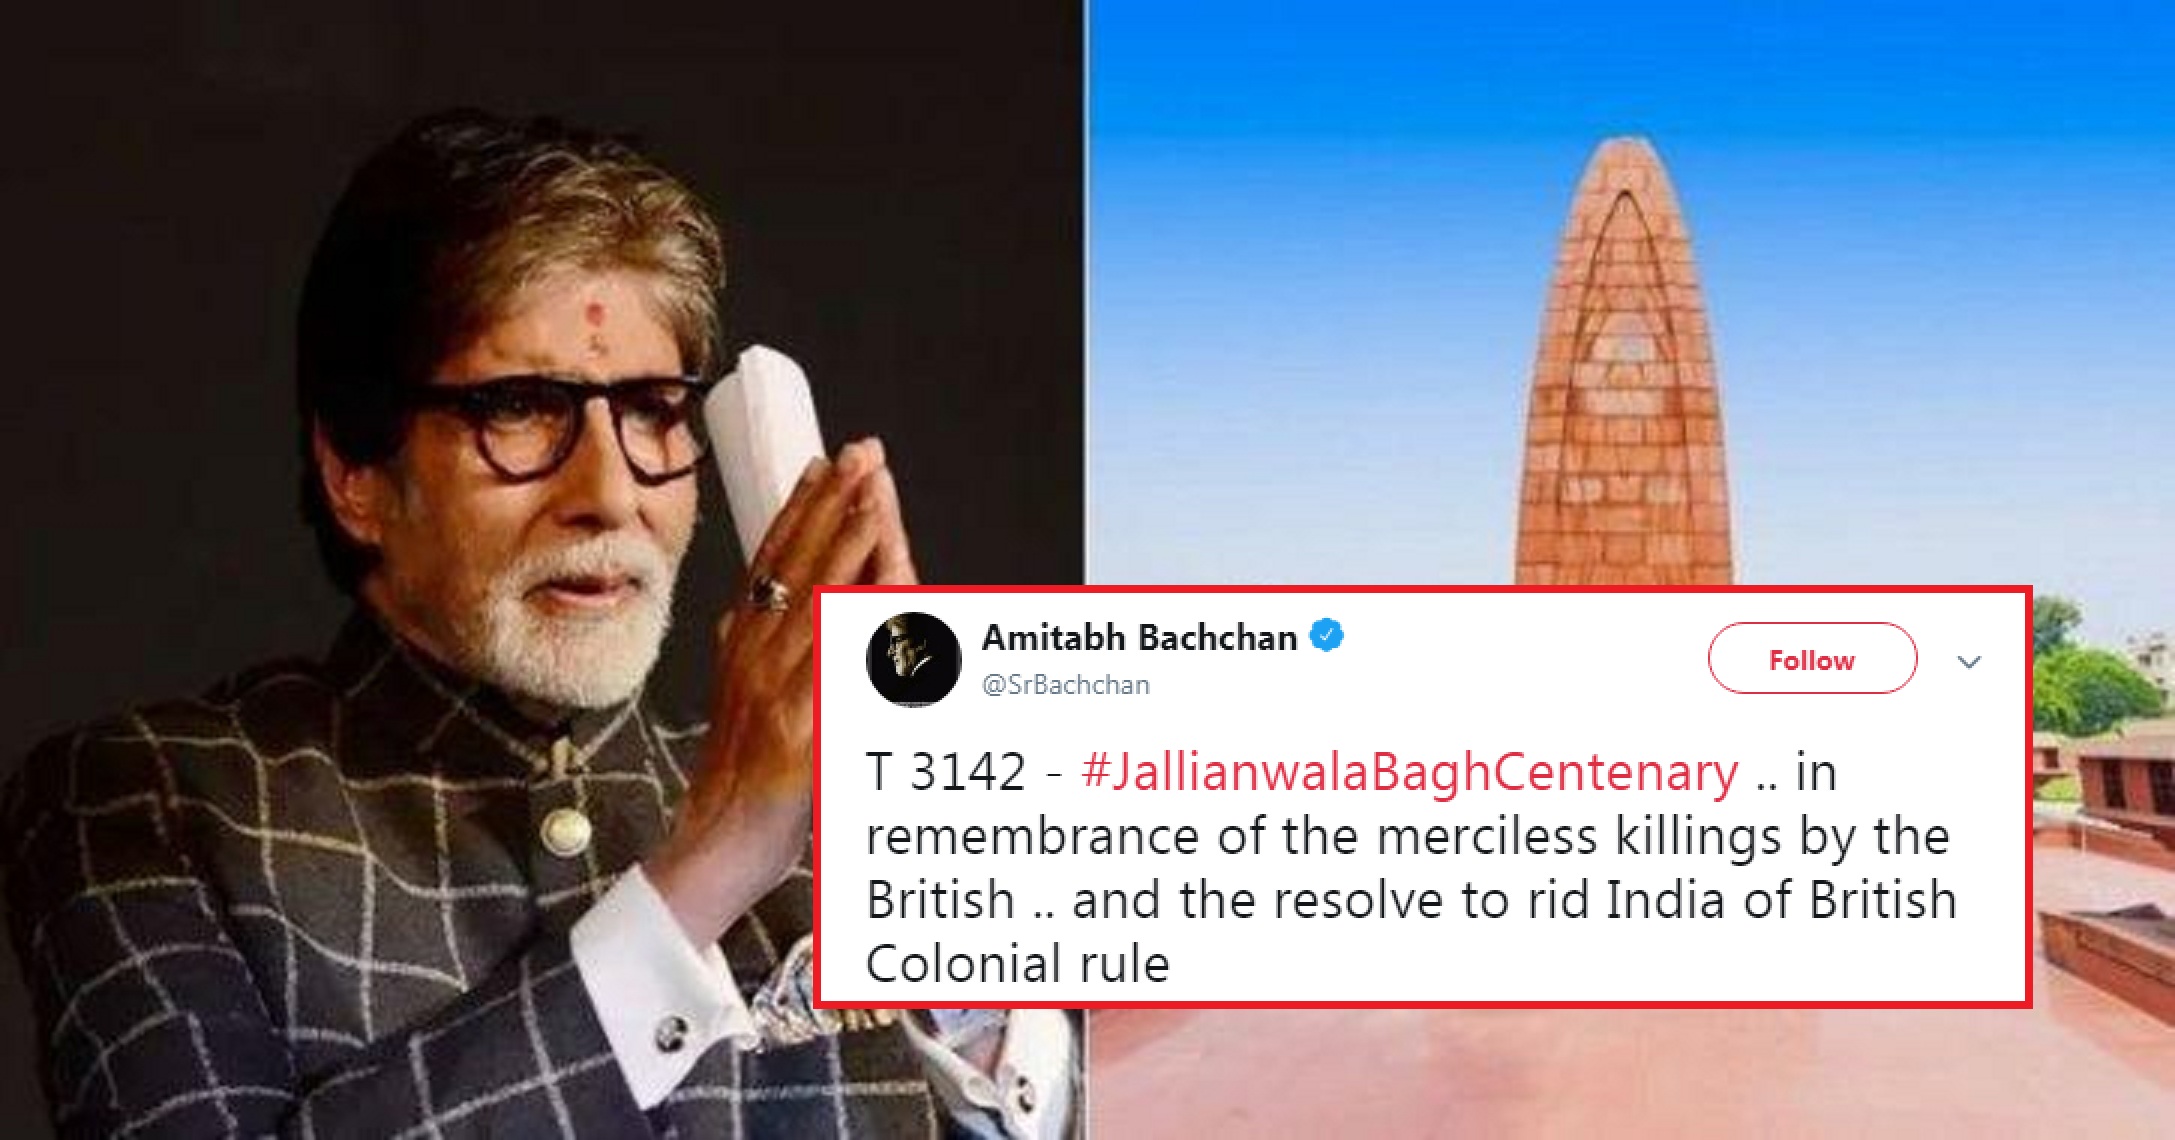 Bollywood Celebs React On The 100th Anniversary Of Jallianwala Bagh Massacre